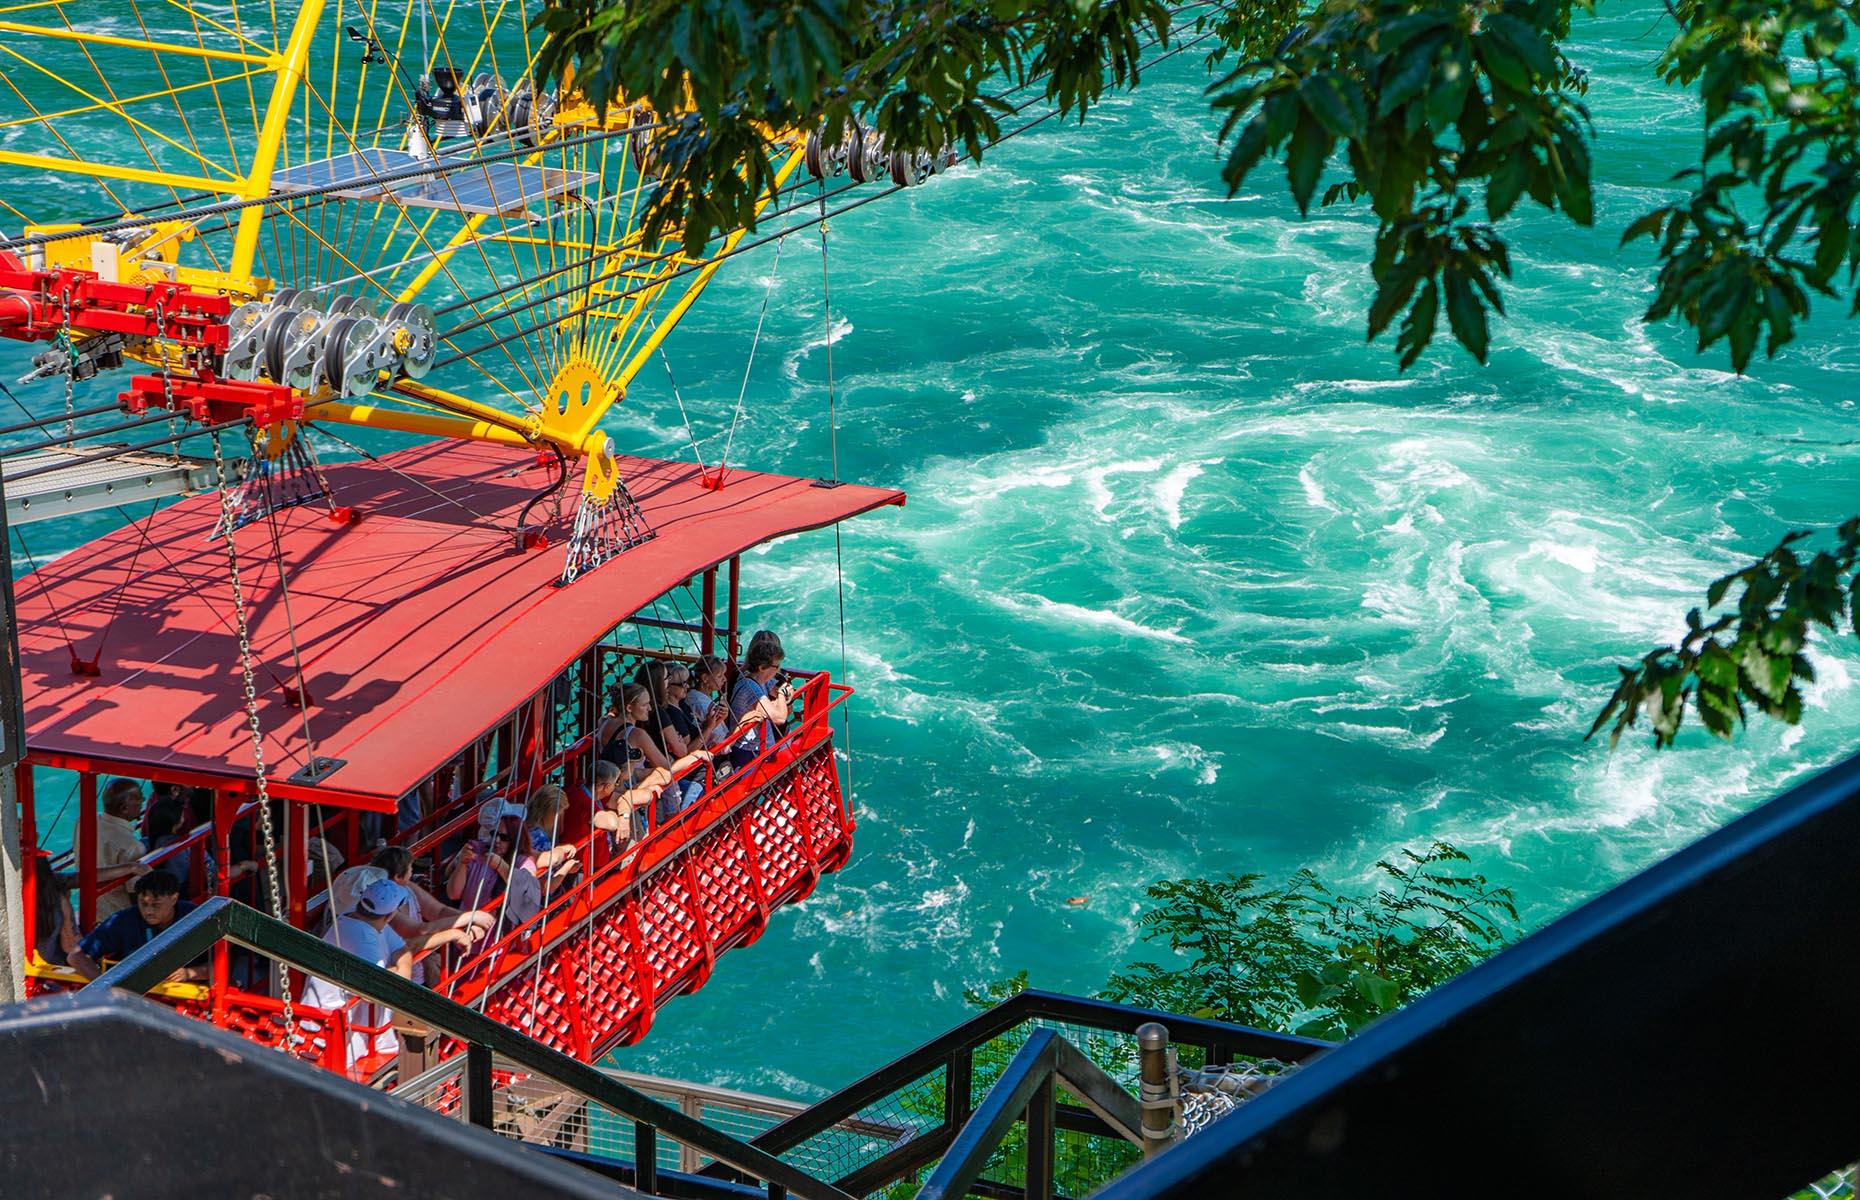 <p>If you don’t like heights from an open-air vehicle, look away now. The historic <a href="https://www.niagaraparks.com/visit/attractions/whirlpool-aero-car">Whirlpool Aero Car</a> takes you across the Niagara Gorge at a dizzying 3,500 feet (1,067m) in the air.</p>  <p>The brainchild of renowned Spanish engineer Leonardo Torres Quevedo, the aero car has been in operation since 1916. Although it’s been restored several times since, it still maintains its unique original design.</p>